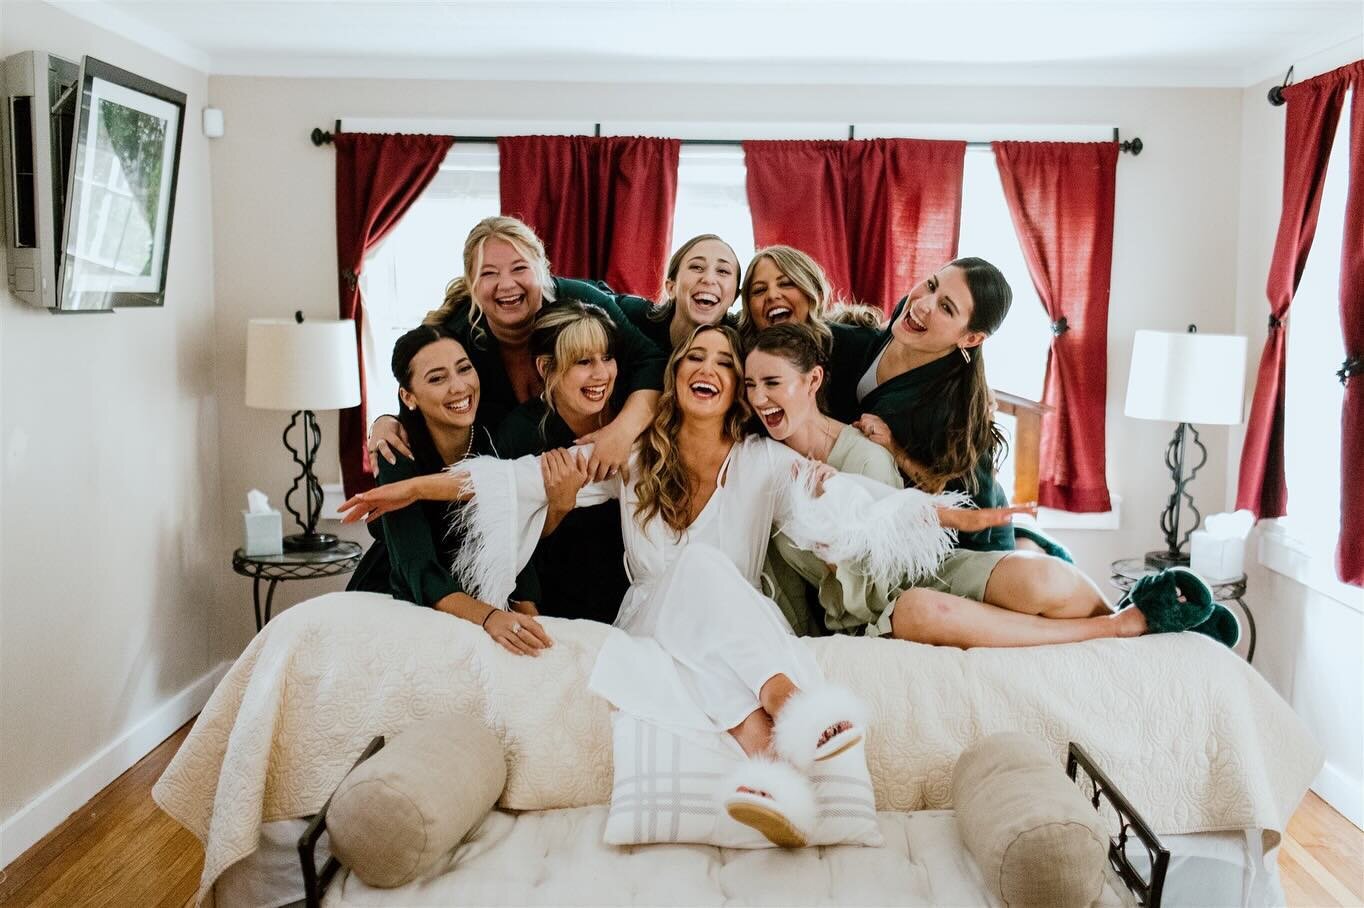 Choosing your wedding party isn&rsquo;t just about selecting individuals to fill roles; it&rsquo;s about assembling a squad of fun-loving, party-starting champions who will elevate your celebration to legendary status. These are the ones who bring th